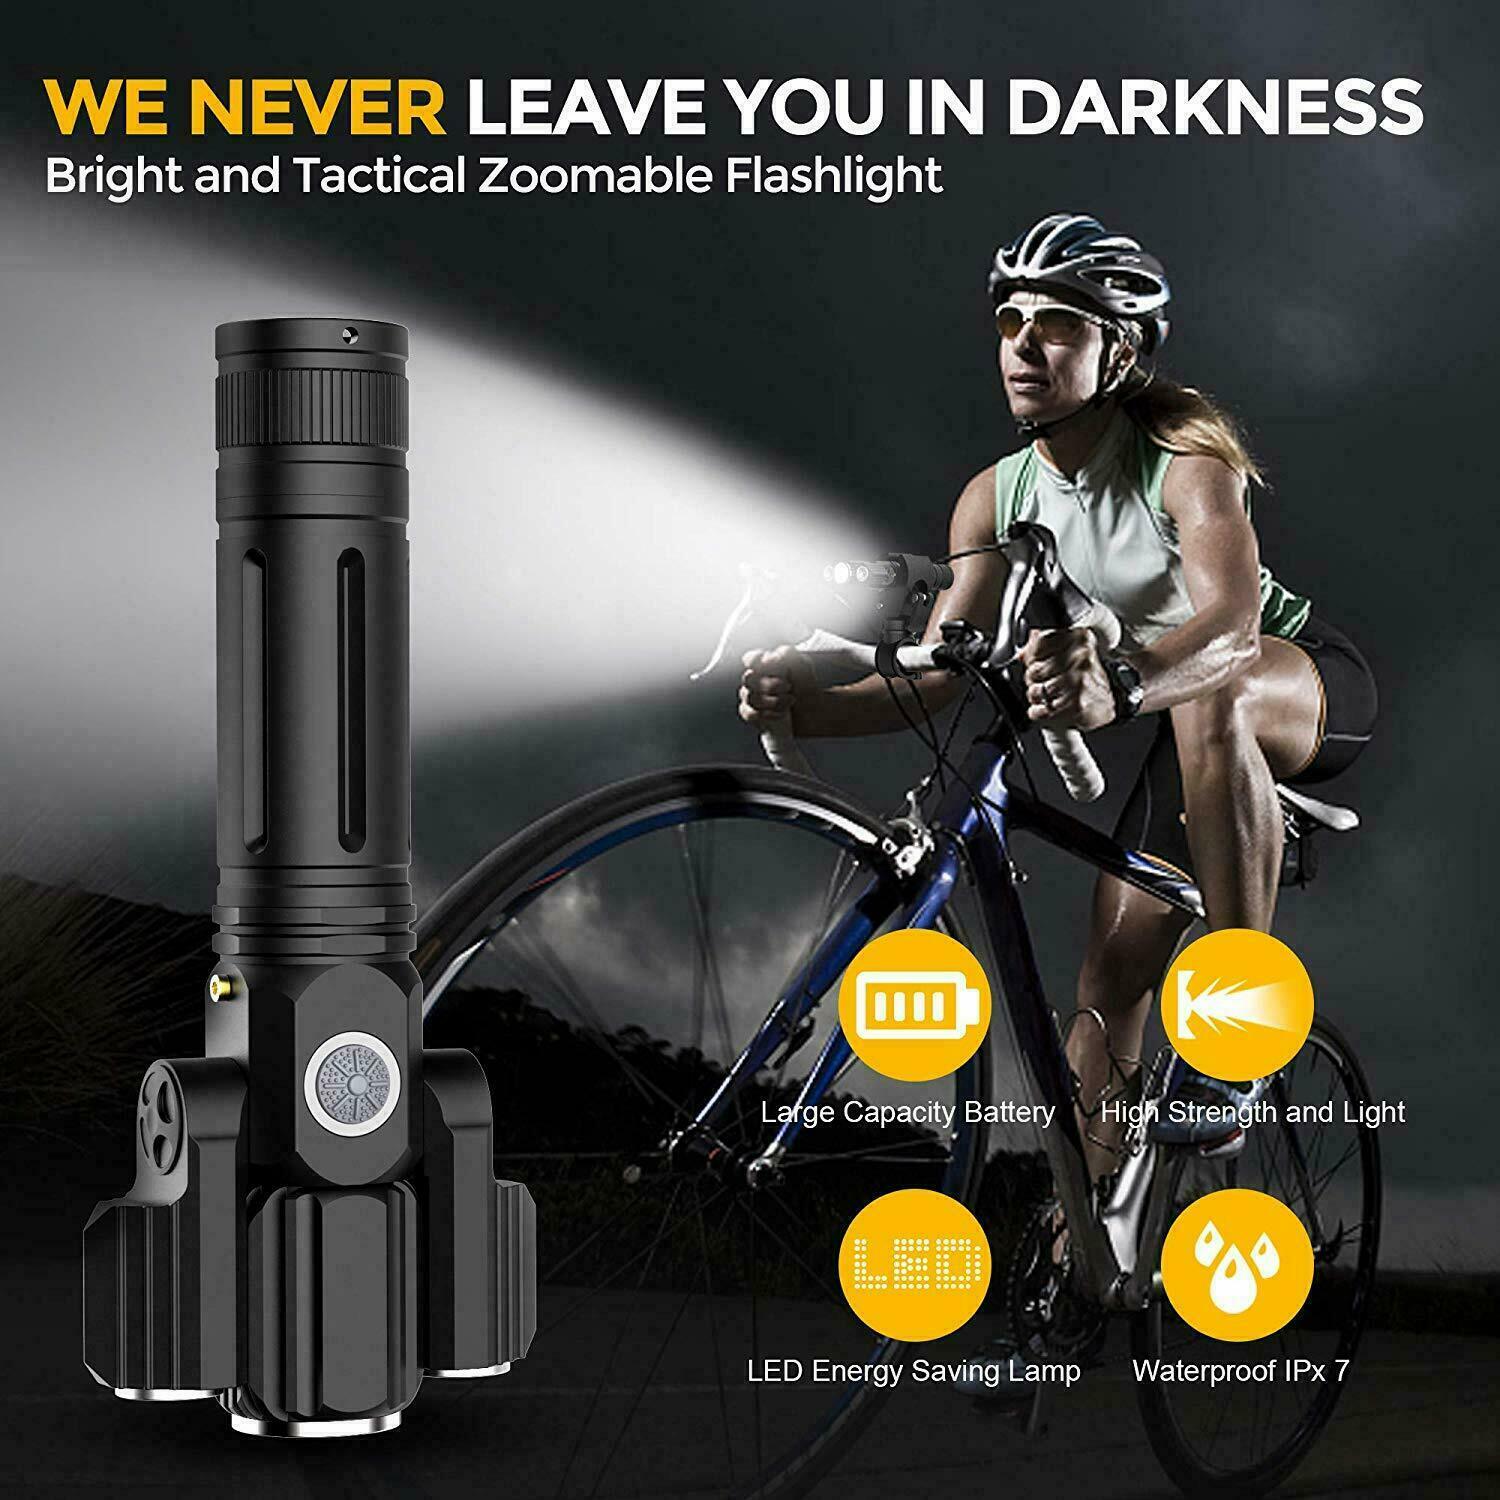 10000LM USB Rechargeable Bike Light Super Bright Bicycle Lights Headlight Front Light IPX5 Waterproof - Riding Cycling Camping - image 3 of 8